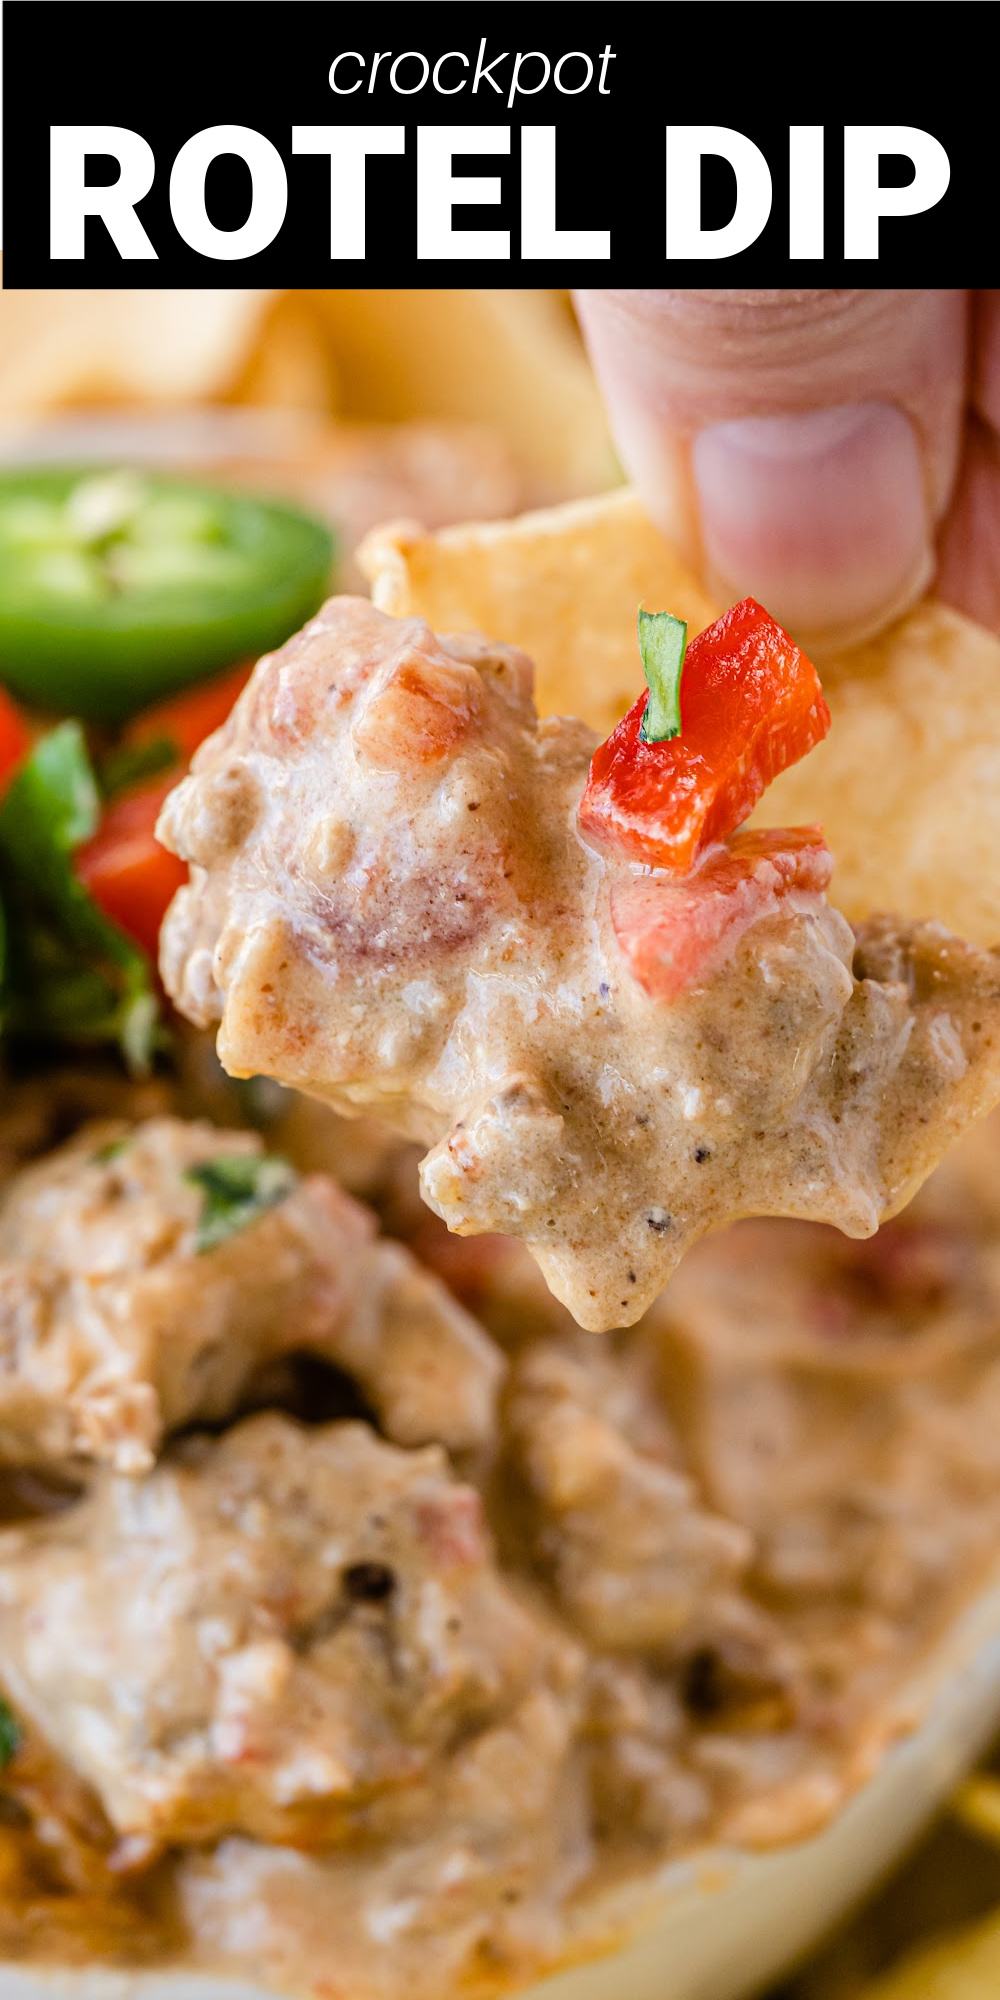 This amazing Crockpot Rotel Dip is creamy, cheesy, and has the perfect spicy sausage. Made Rotel tomatoes, Velveeta cheese and spicy sausage, this tasty appetizer is the perfect dip for every occasion, from parties or everyday snacking.